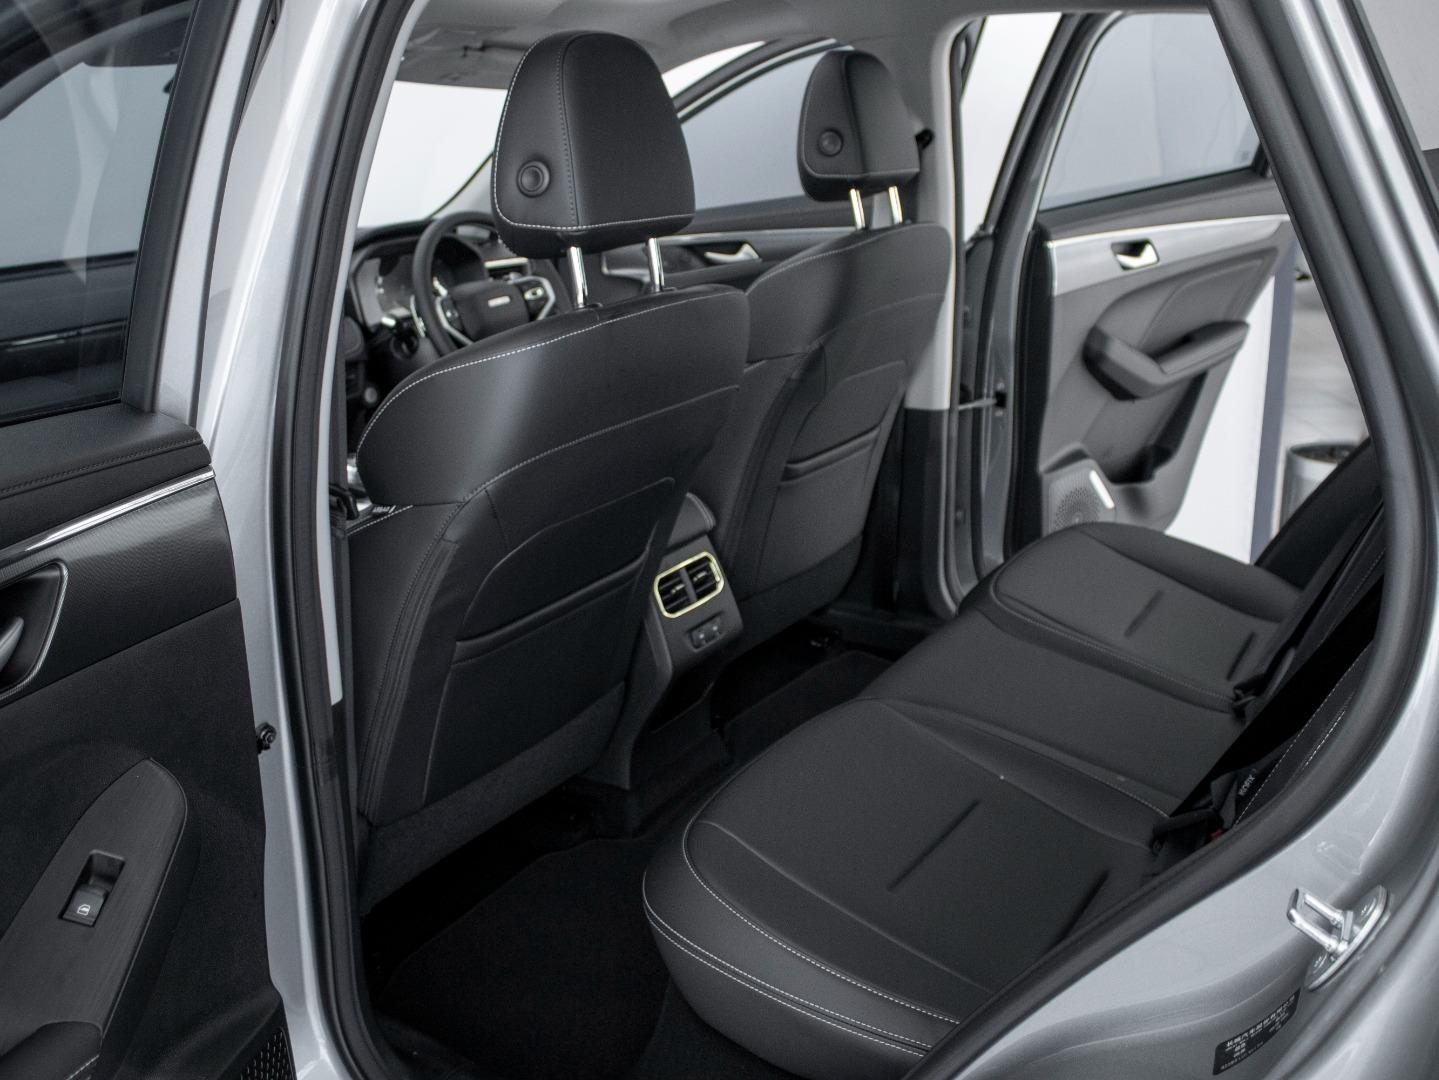 how many seats are there in the haval jolion?